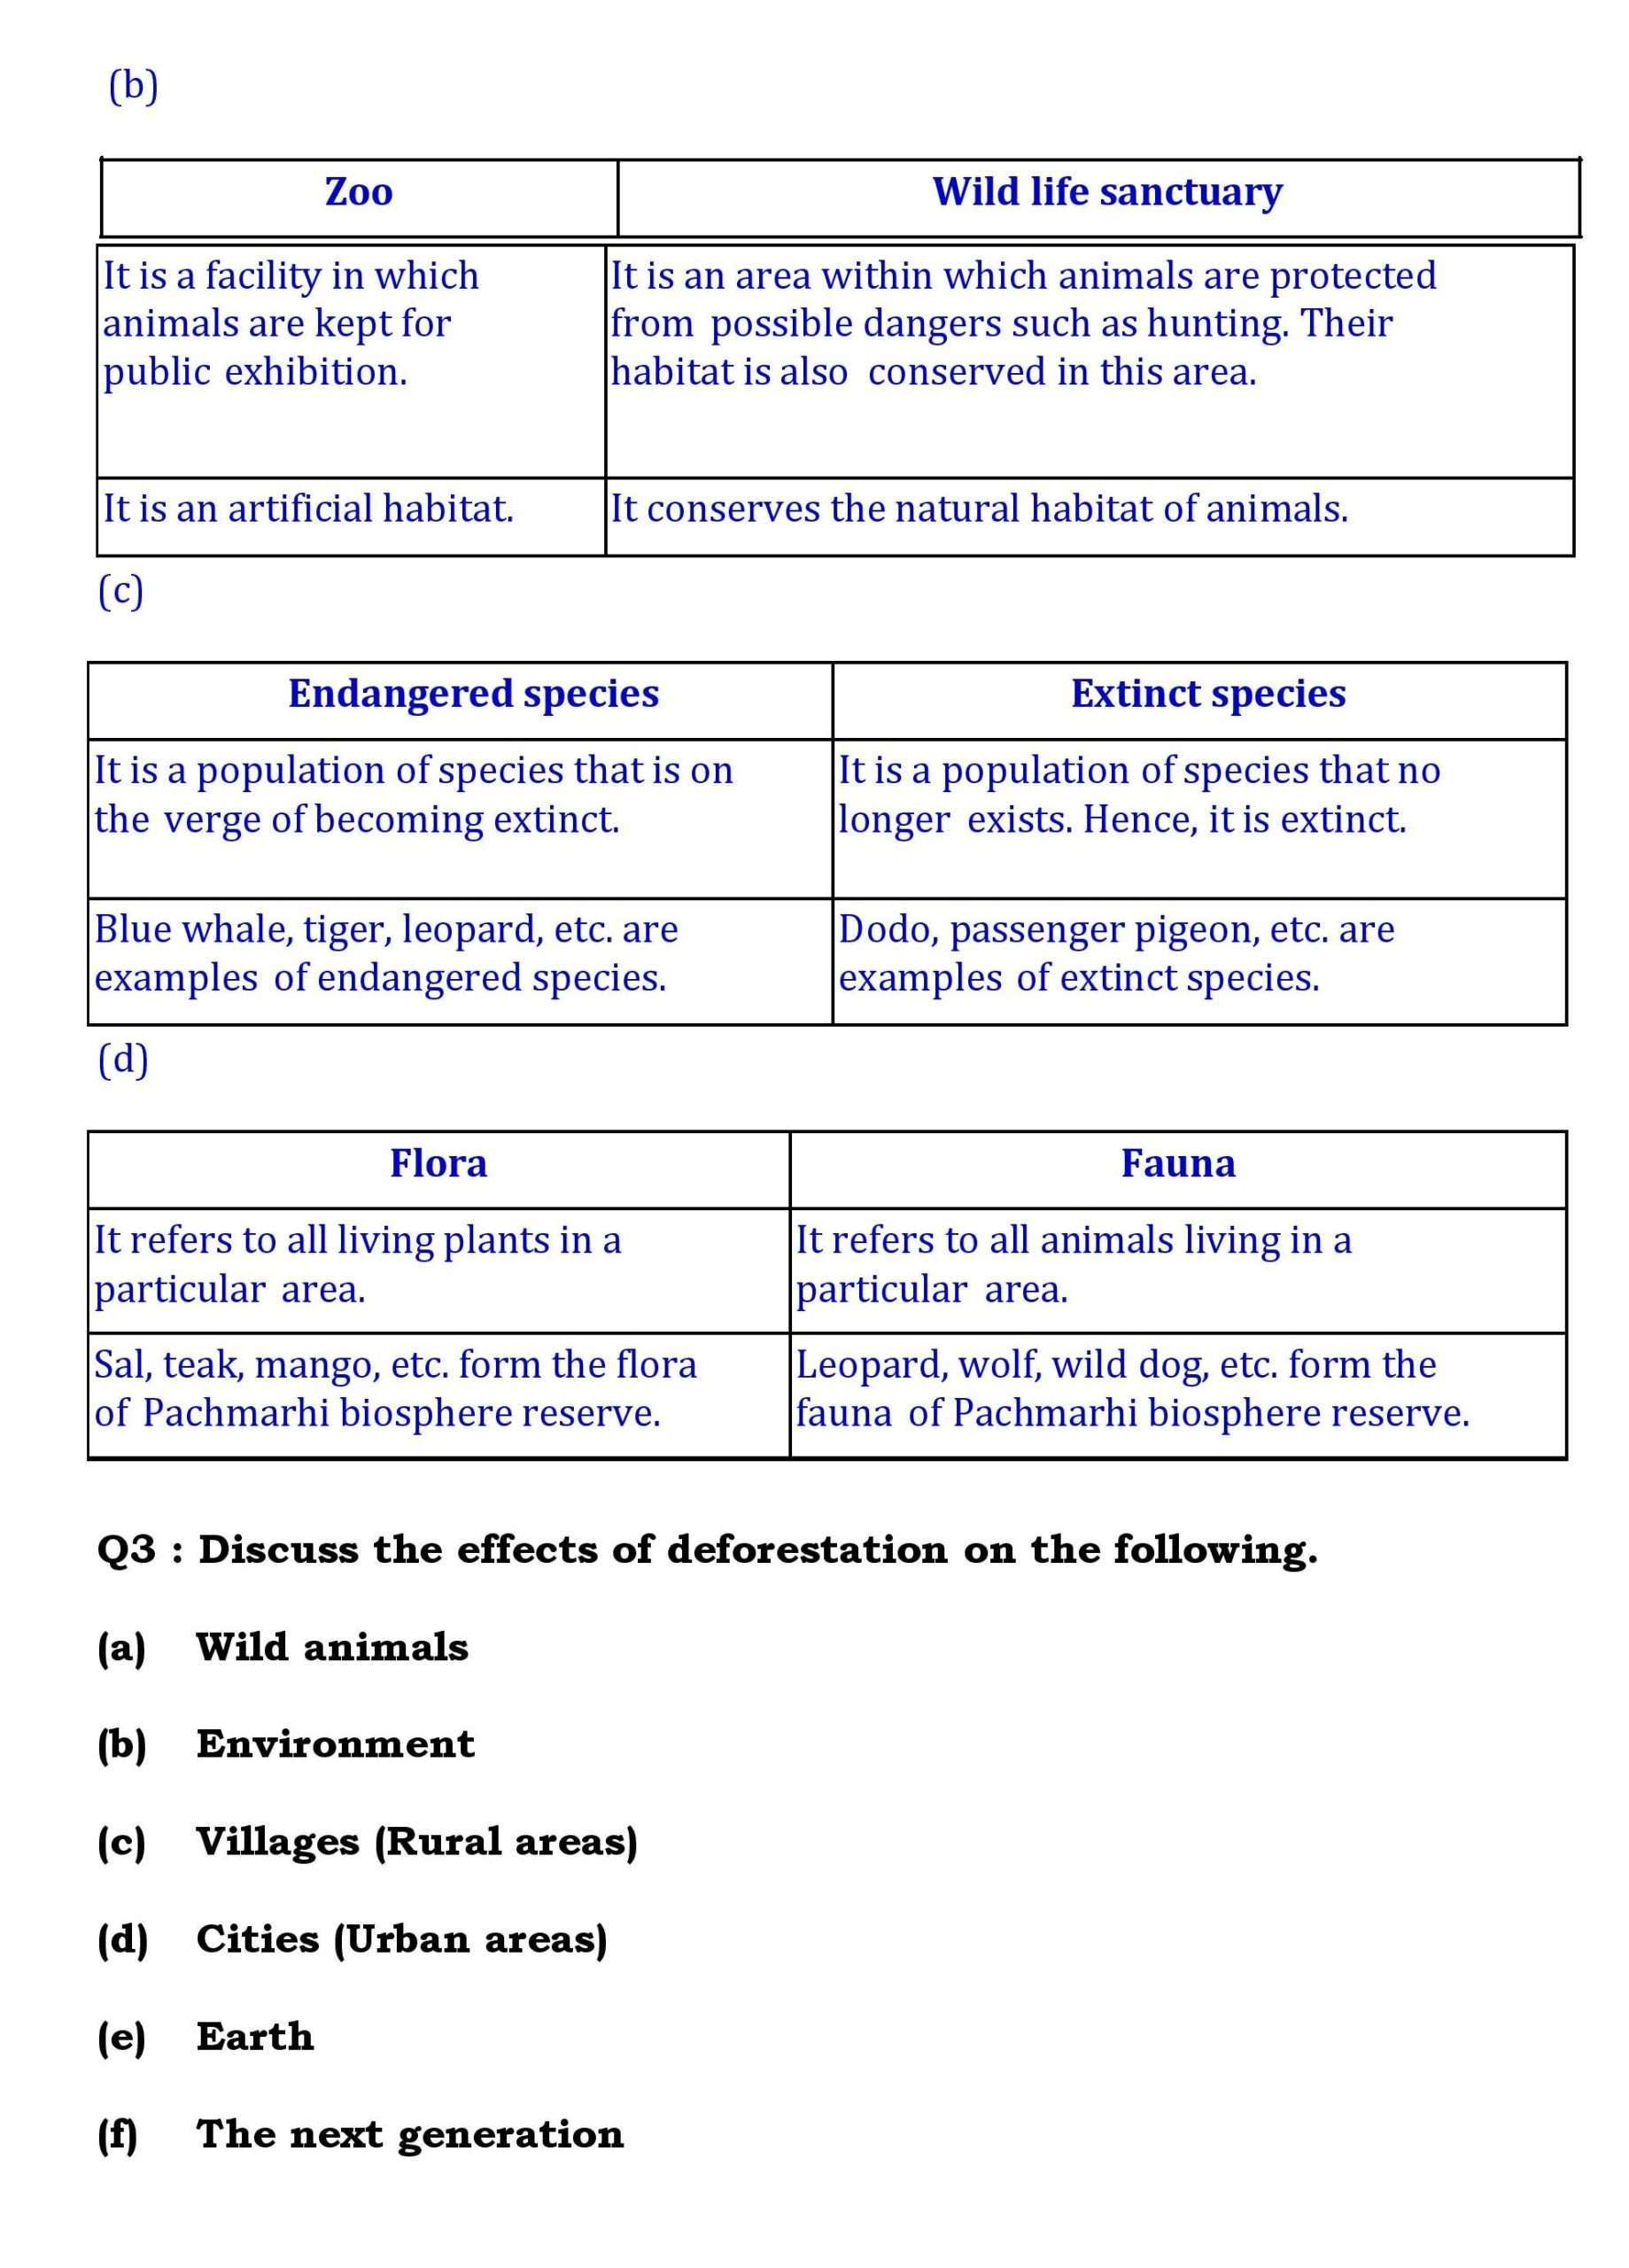 Ch-7 Conservation of Plants and Animals- Page wise NCERT Solution